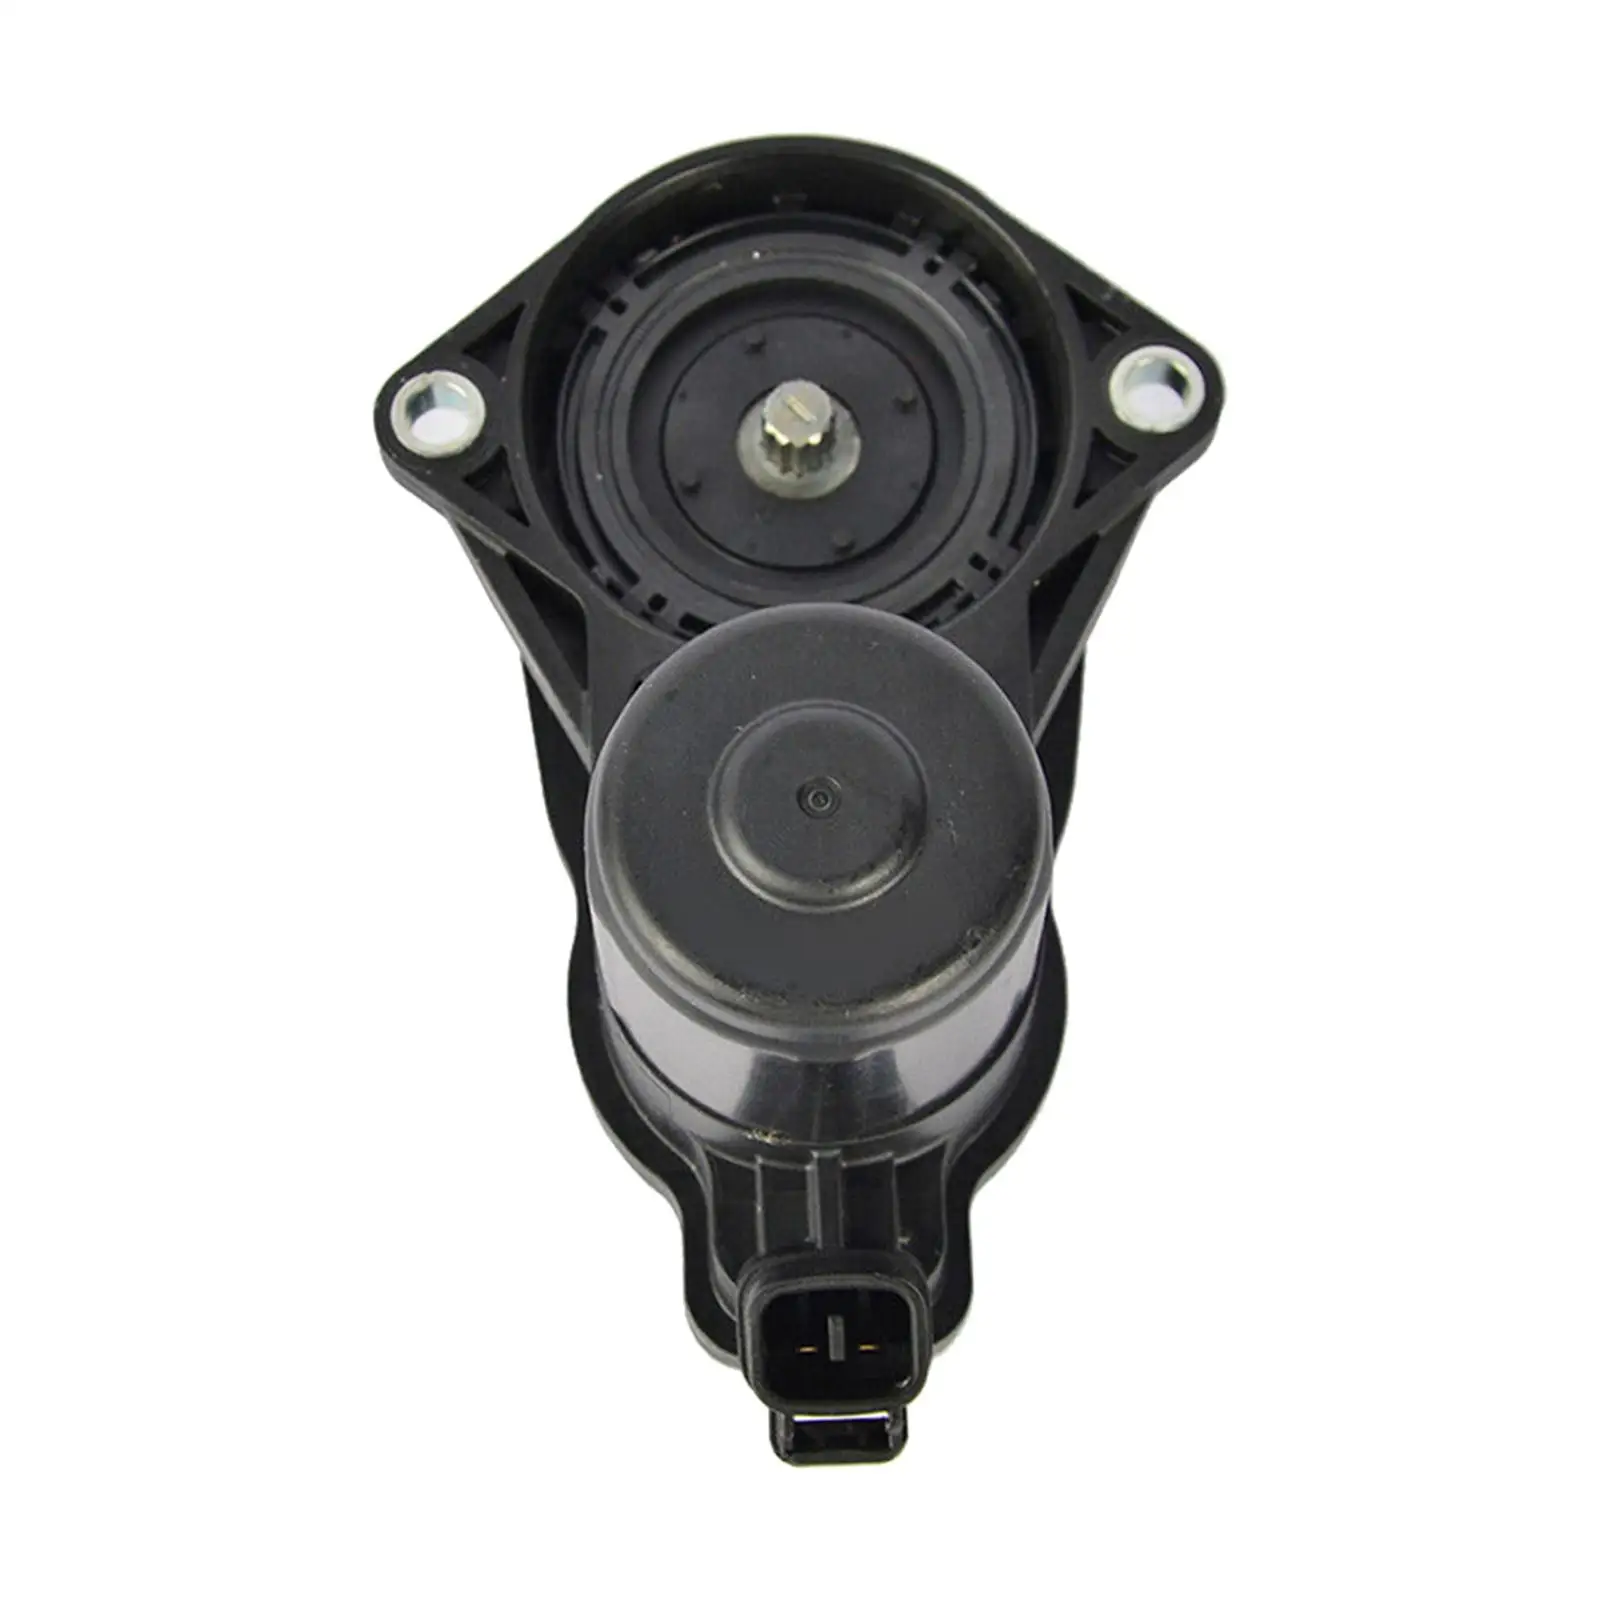 Parking Brake Actuator 46310-33010 Automotive Replacement Part replacement for toyota for c-hr Venza Premium